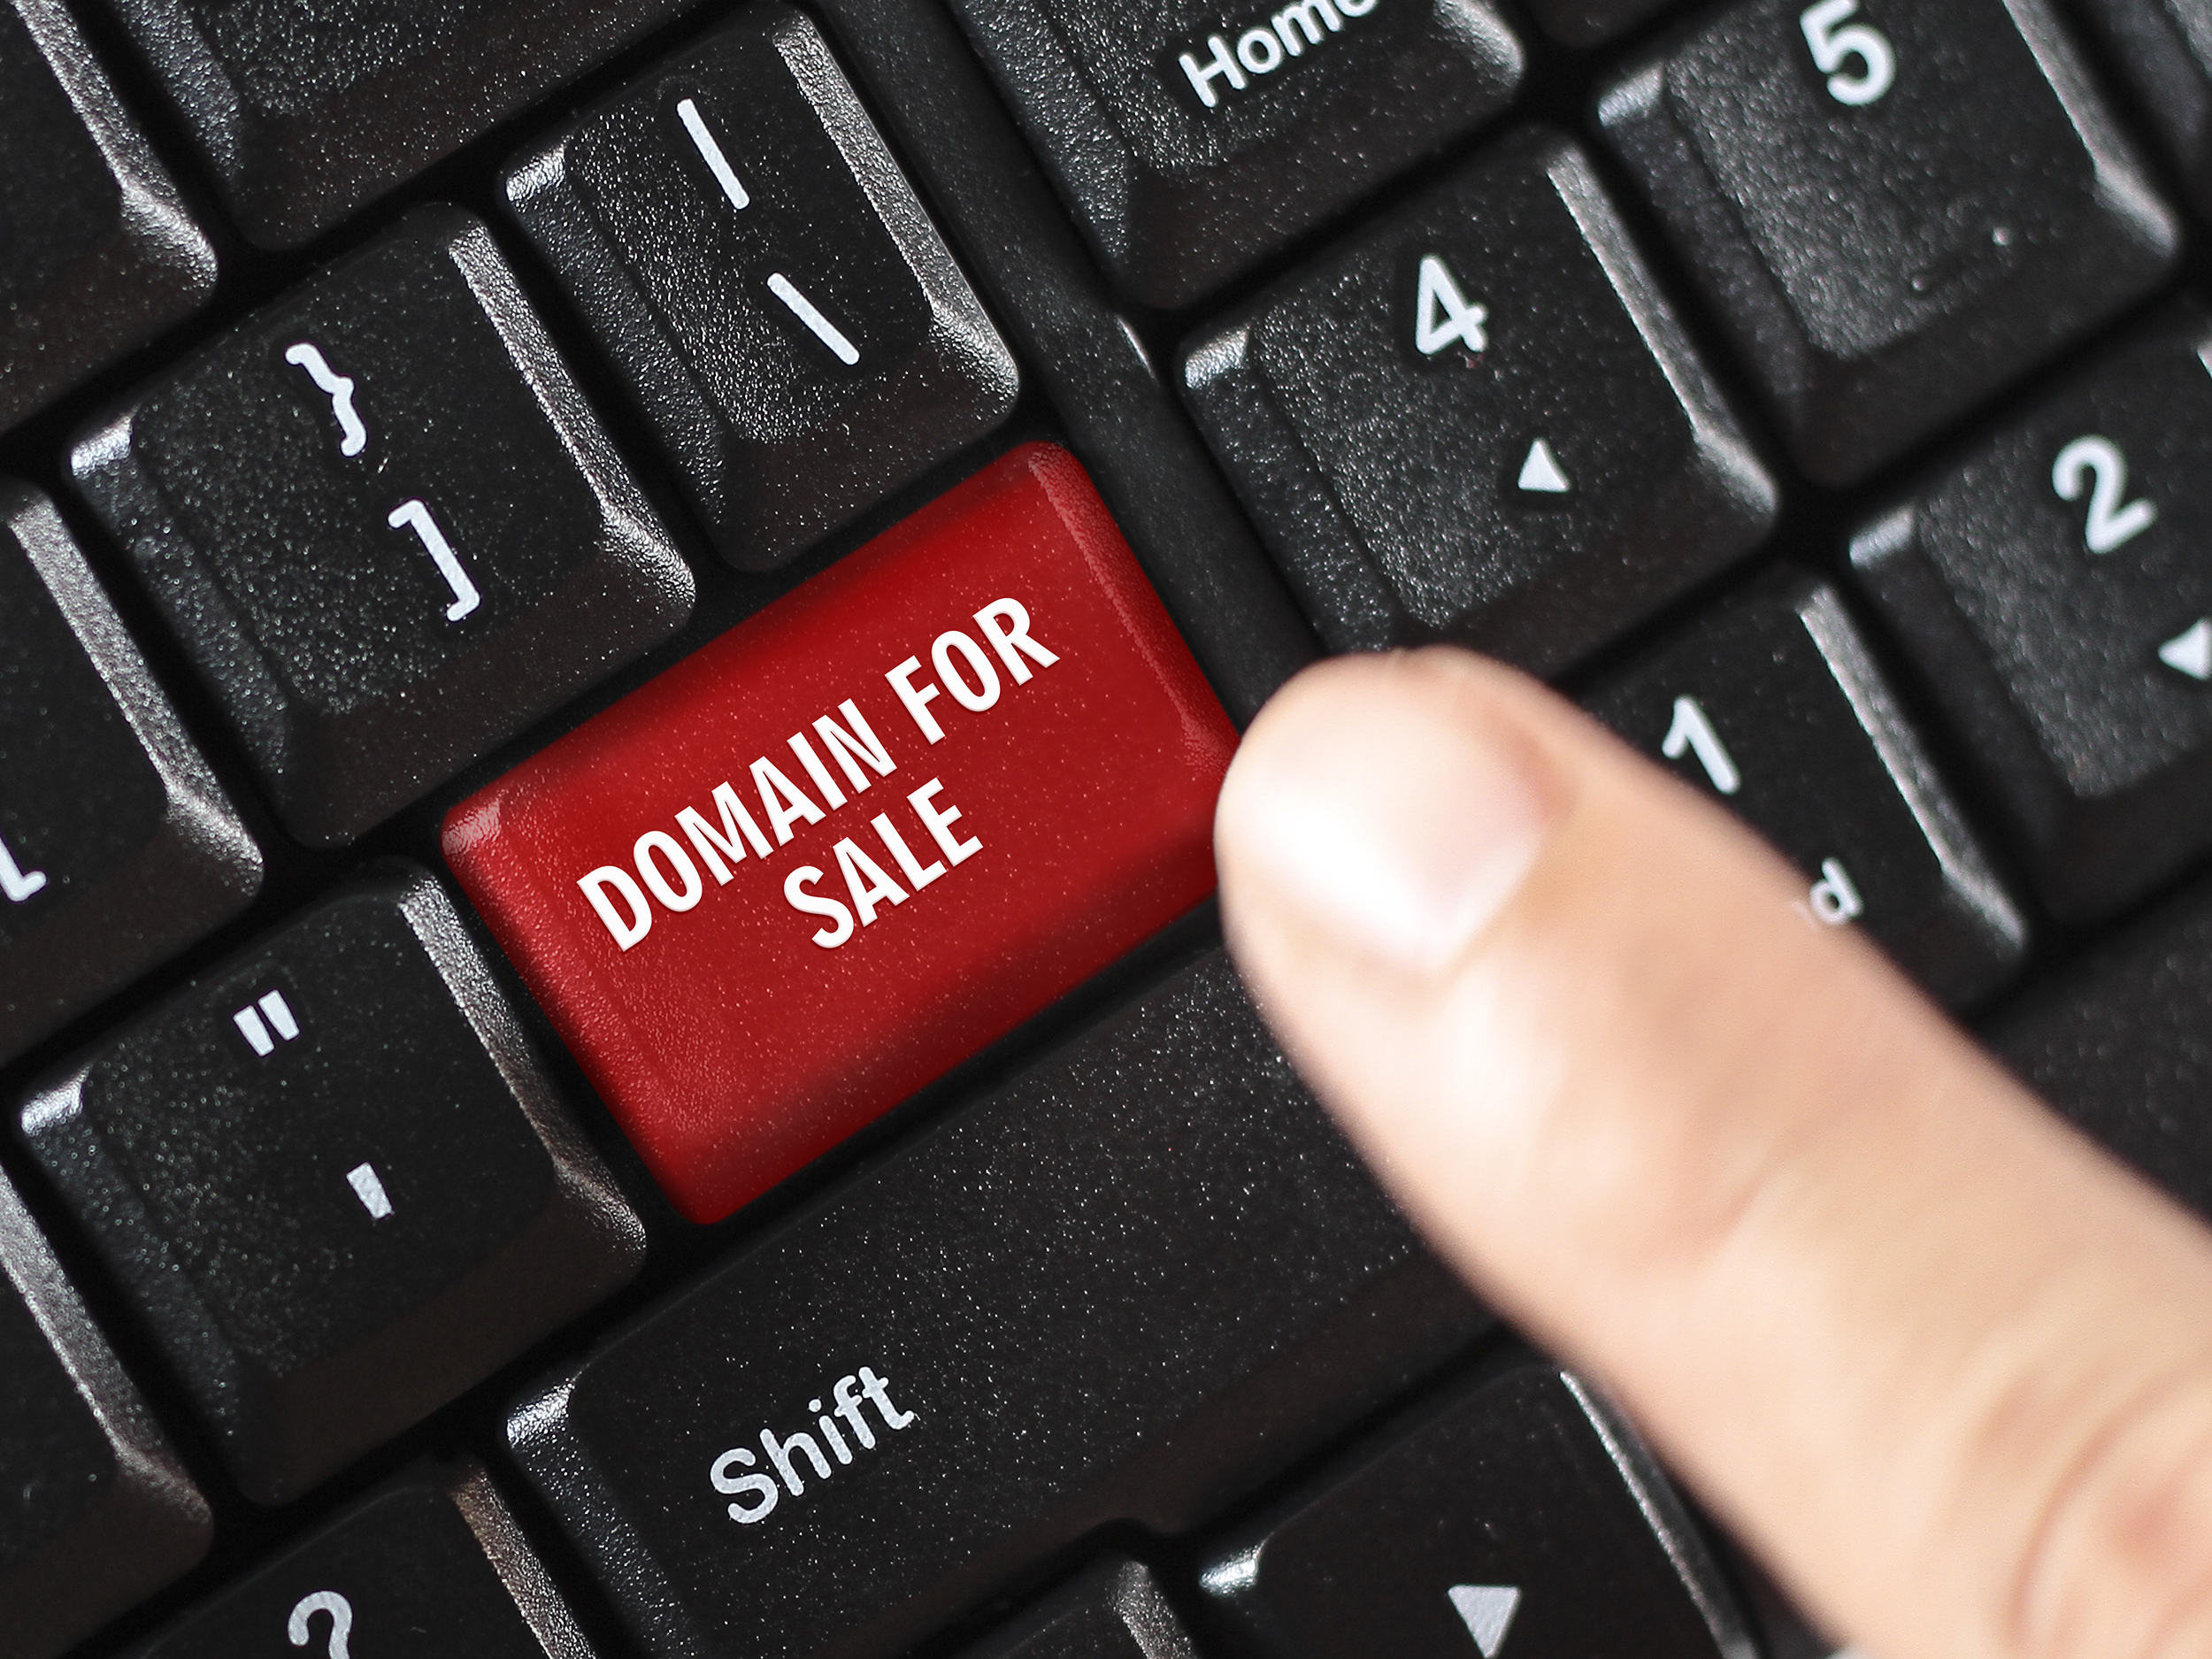 domain for sale words on red keyboard button